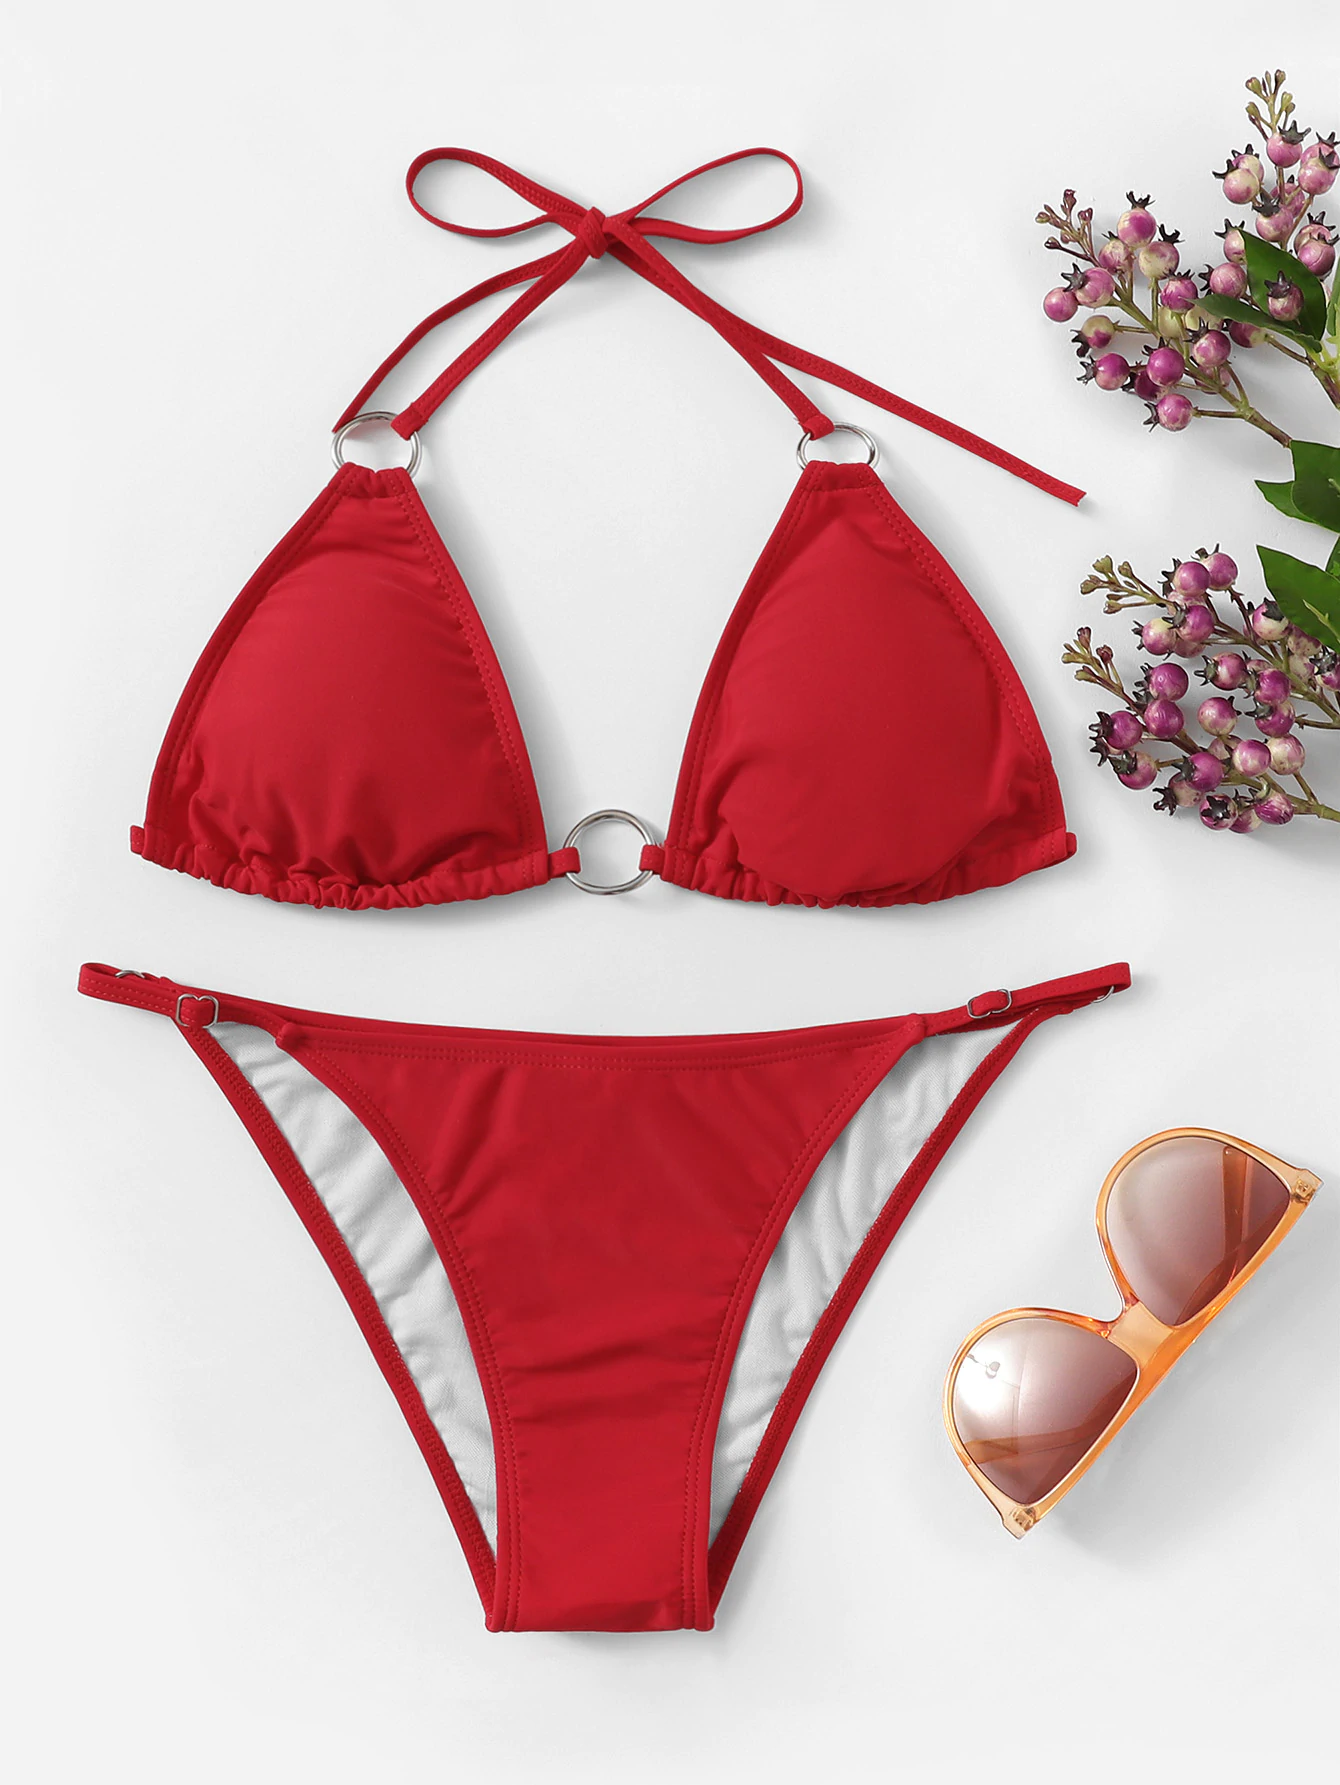 PriceList for Two Piece Tie Front Bikini Swimwear -
 Missadola Fashionable swimsuit with decorative rings – Yongdian